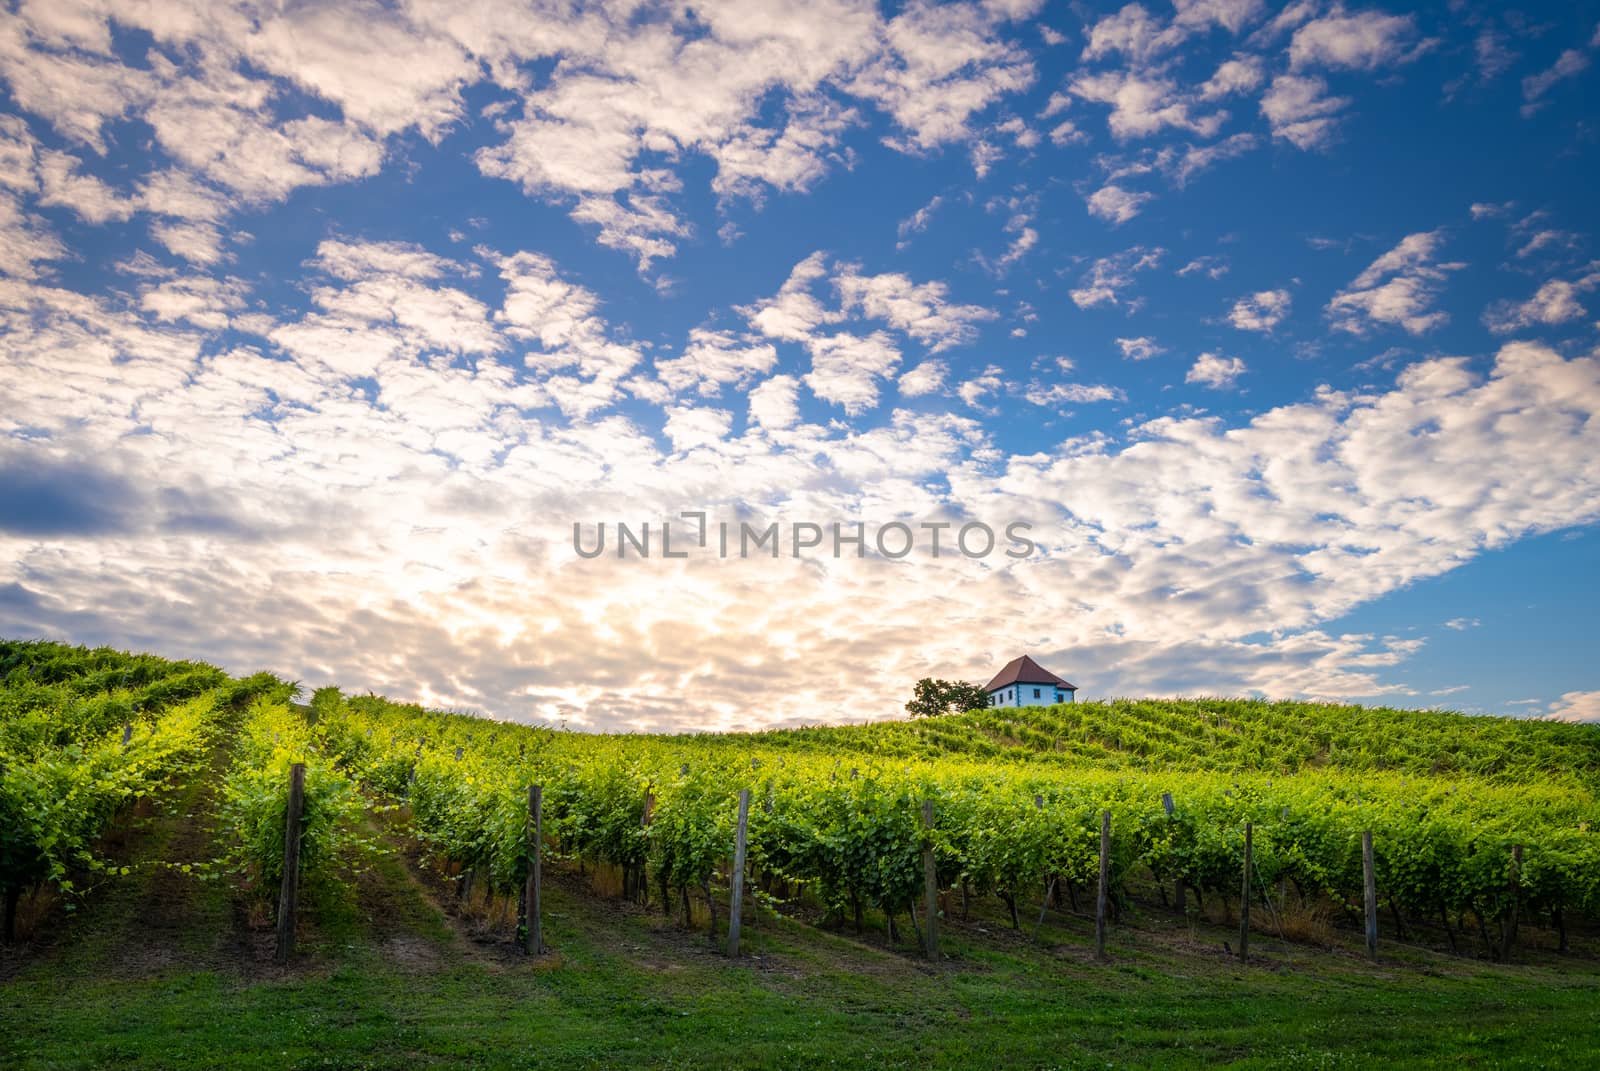 Vineyard with rows of grape vine in sunrise, sunset with old building, villa on top of the vine yard, traditional authentic European winery by asafaric